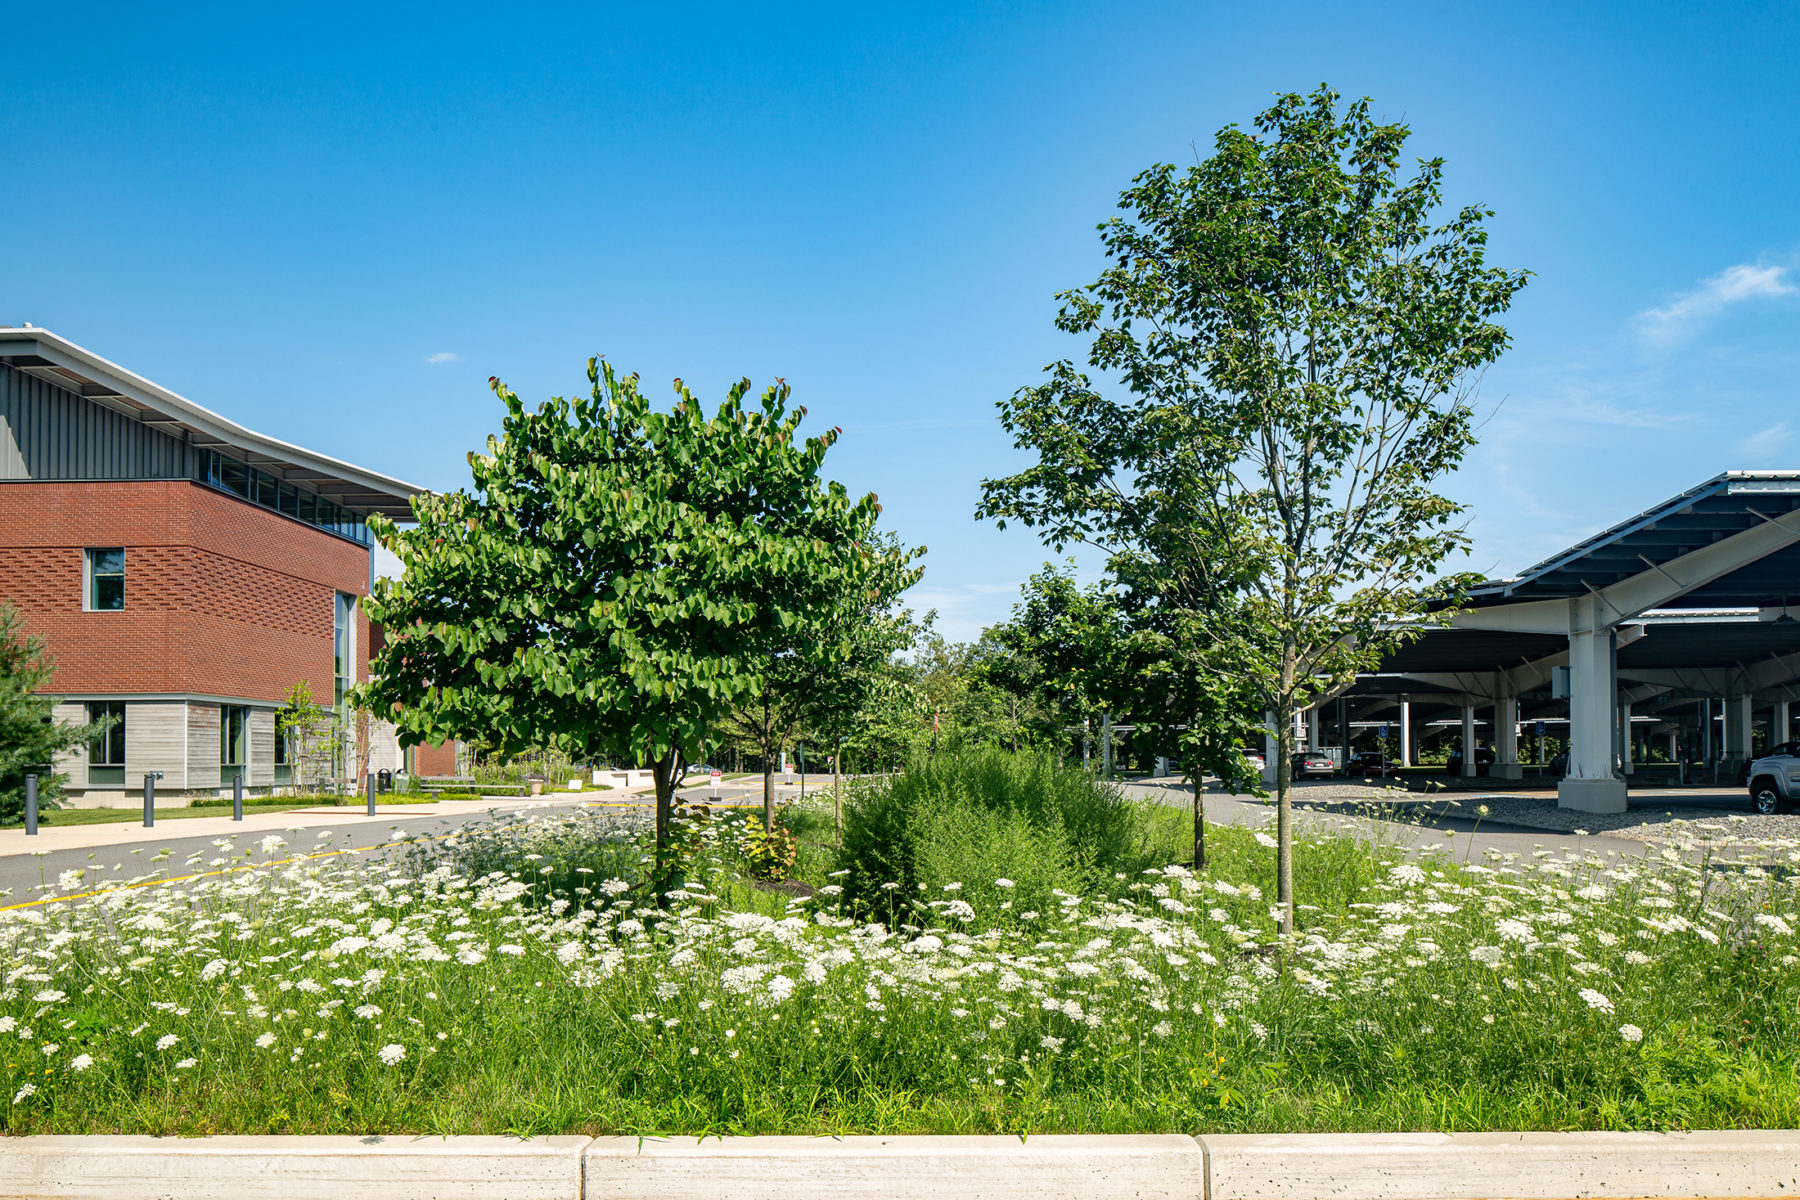 Image featuring two trees highlighting the native plants at the site.